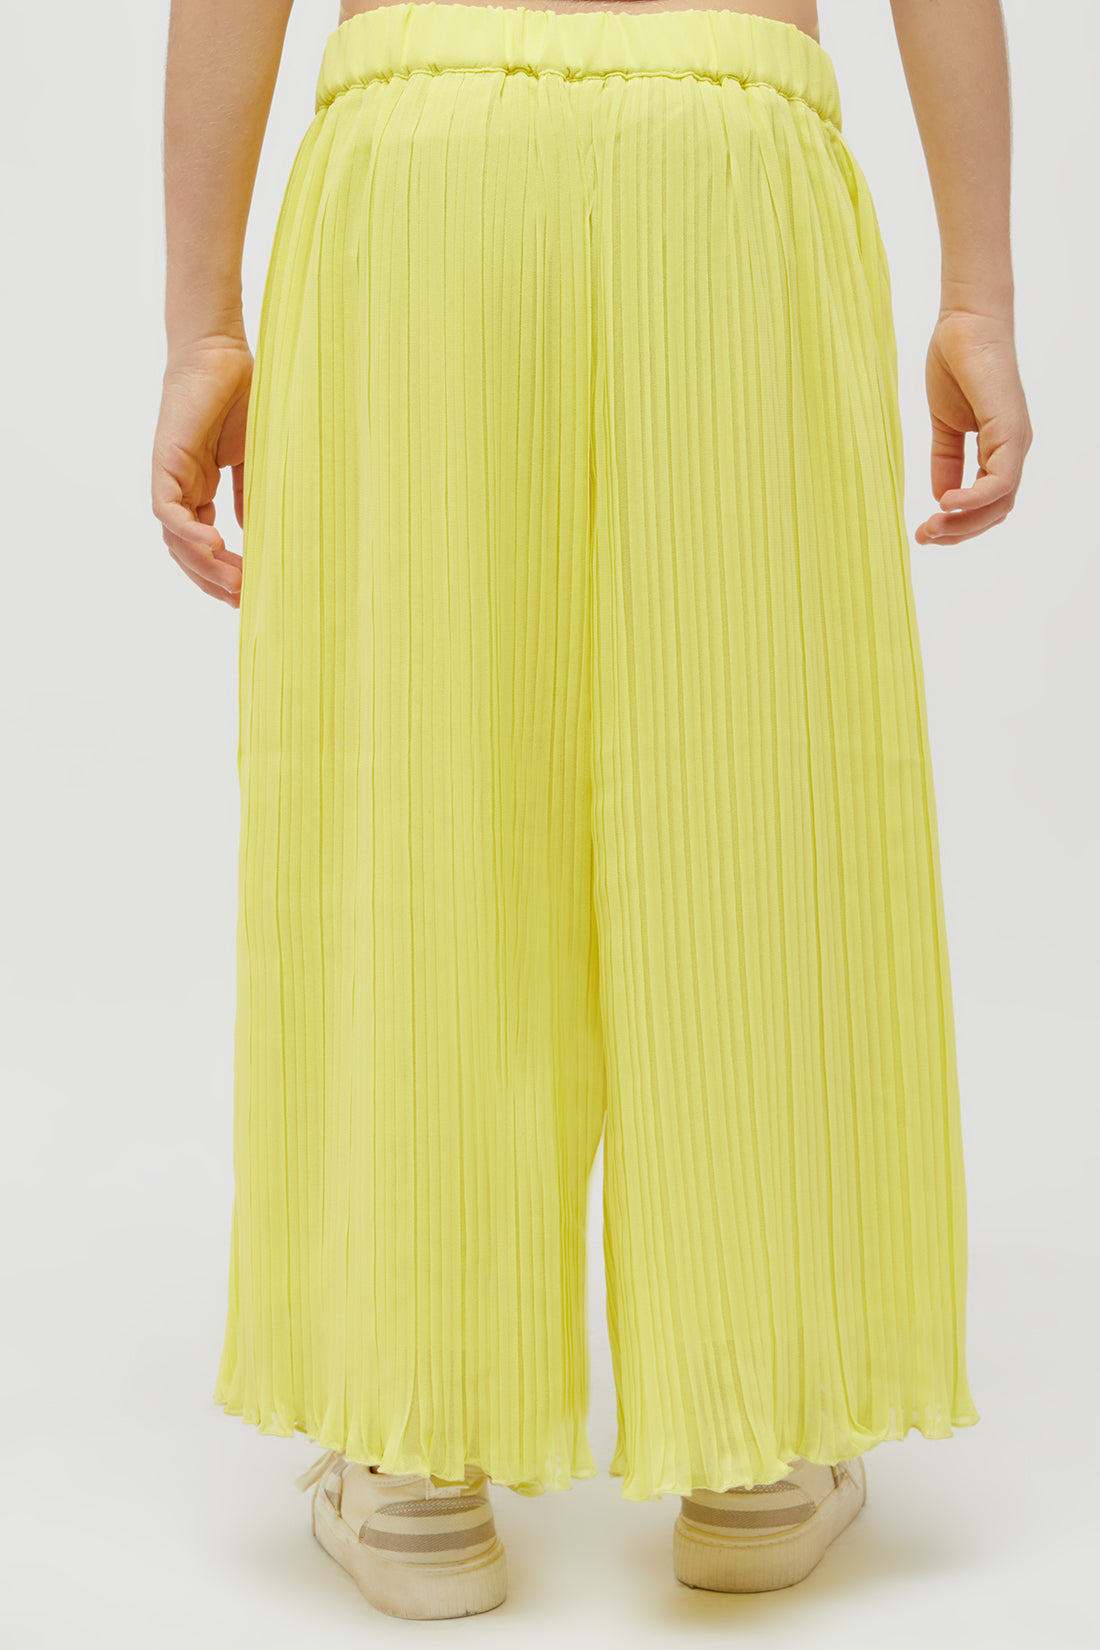 One Friday Crushed Yellow Culotte